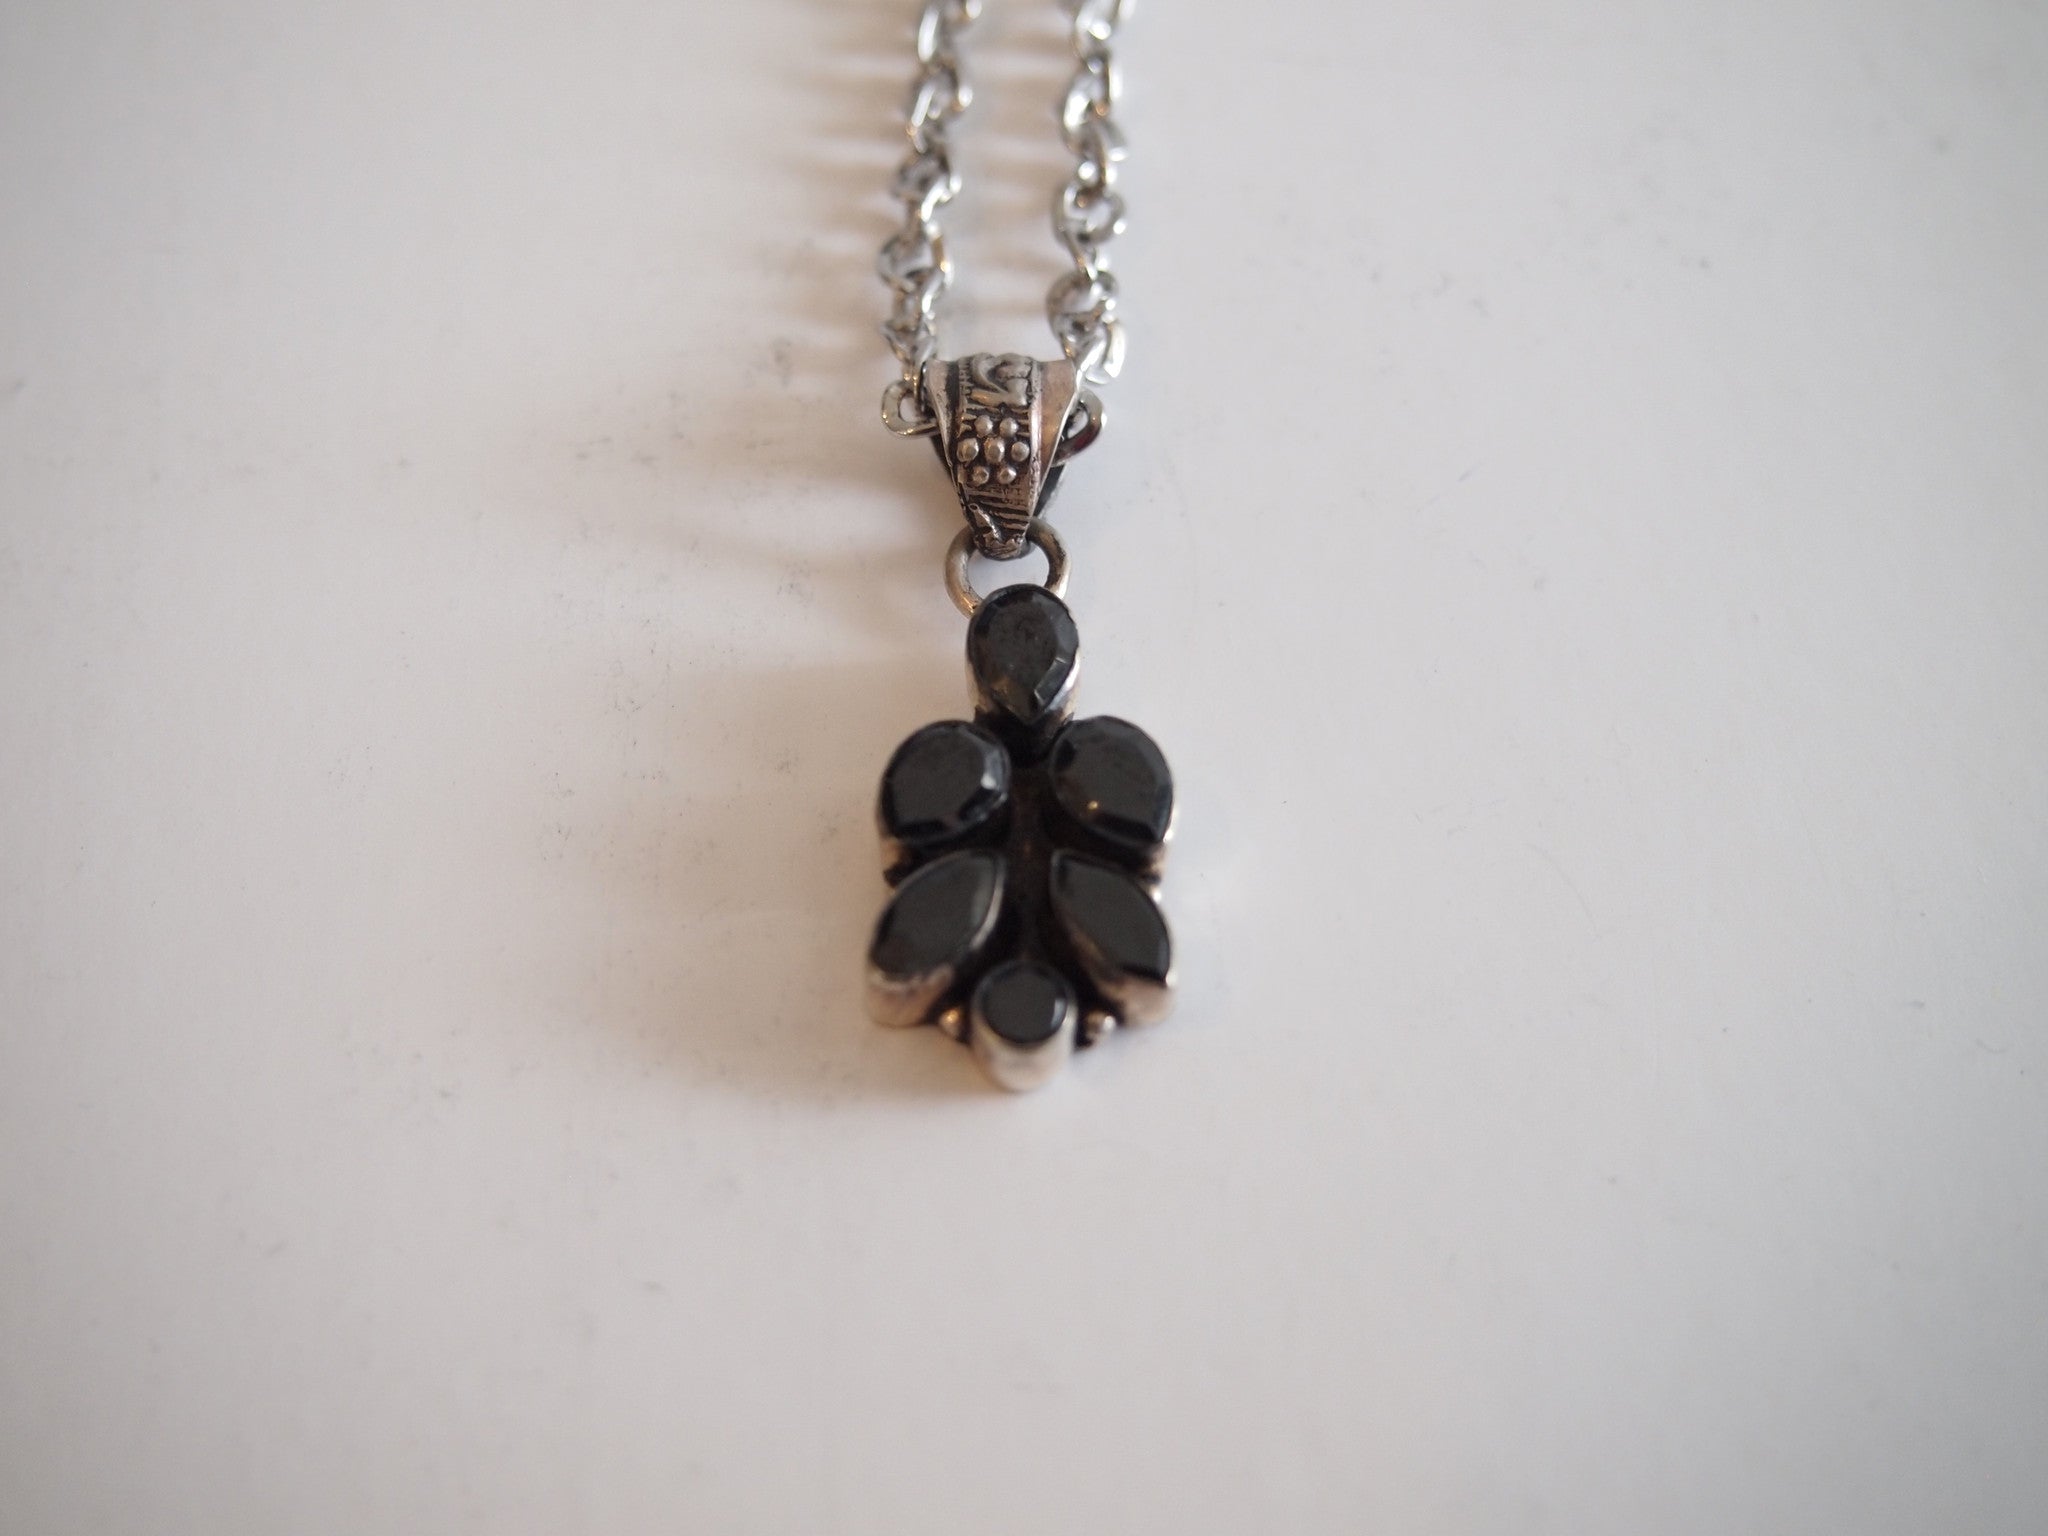 Handmade necklace with onyx with silver rhodium  chain